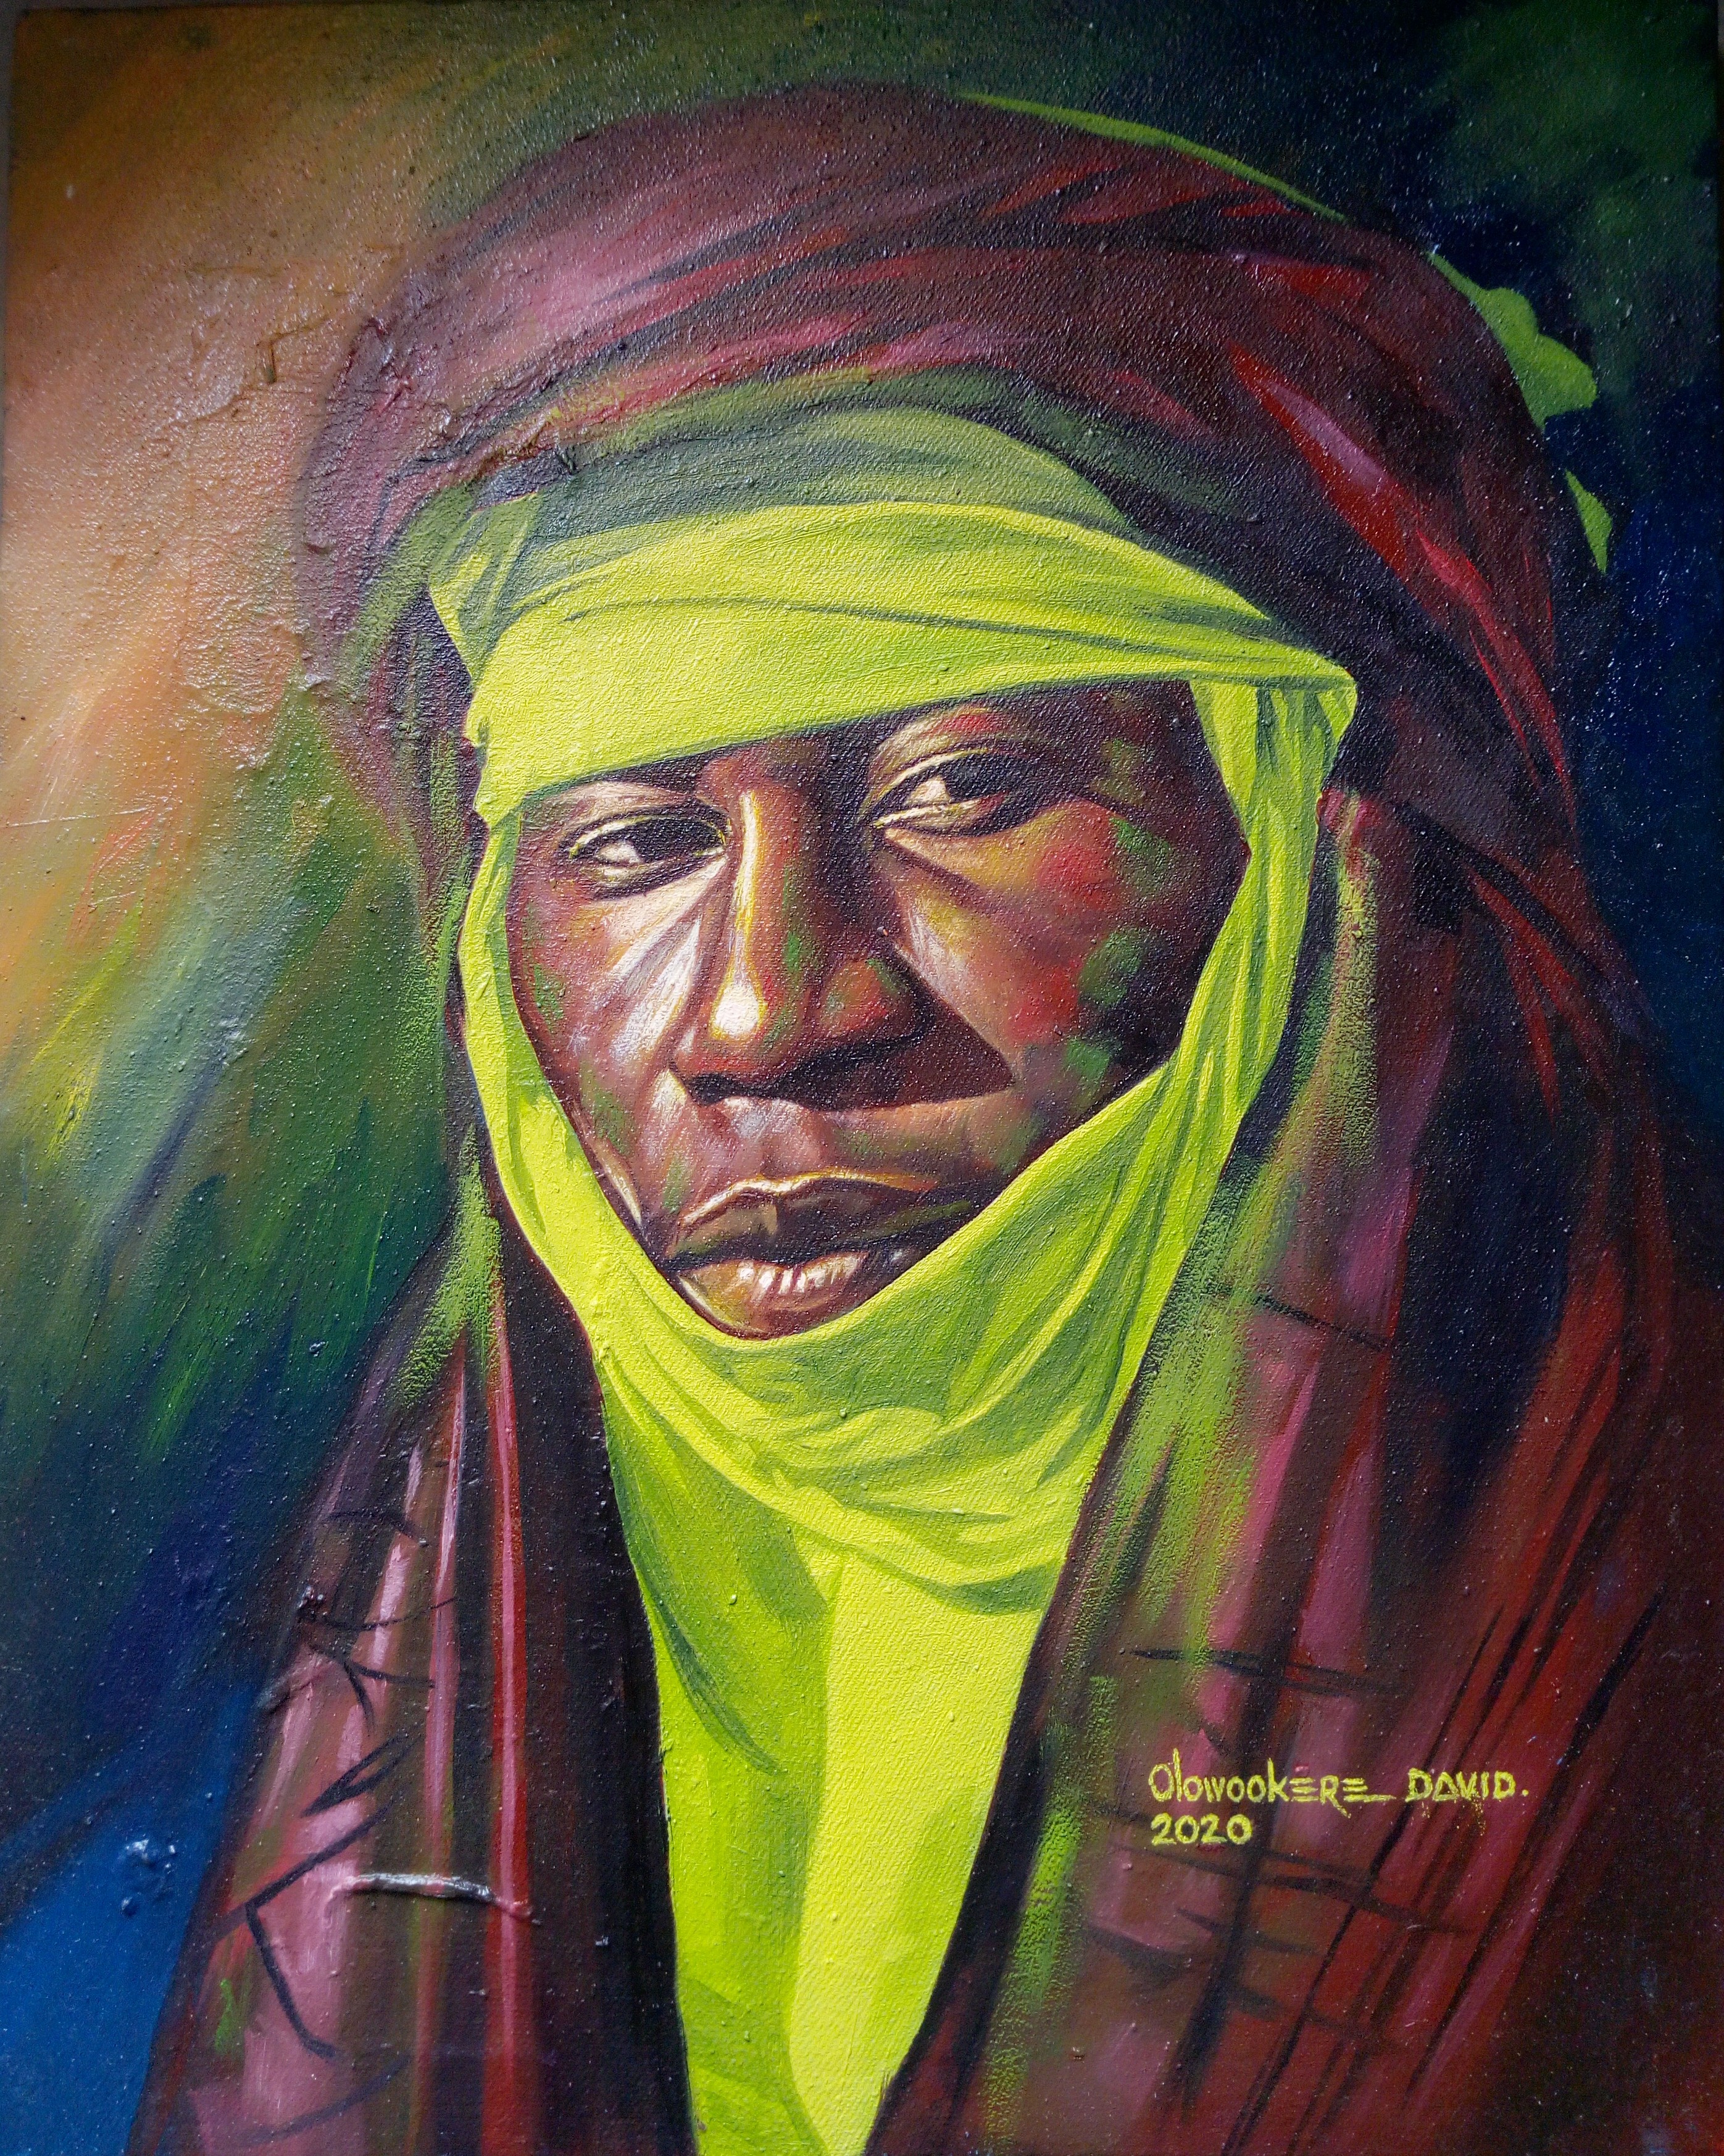 Olowookere David Ayobami, "The Tuaregs III", unframed oils on canvas, 2020, 16in x 20in each. The